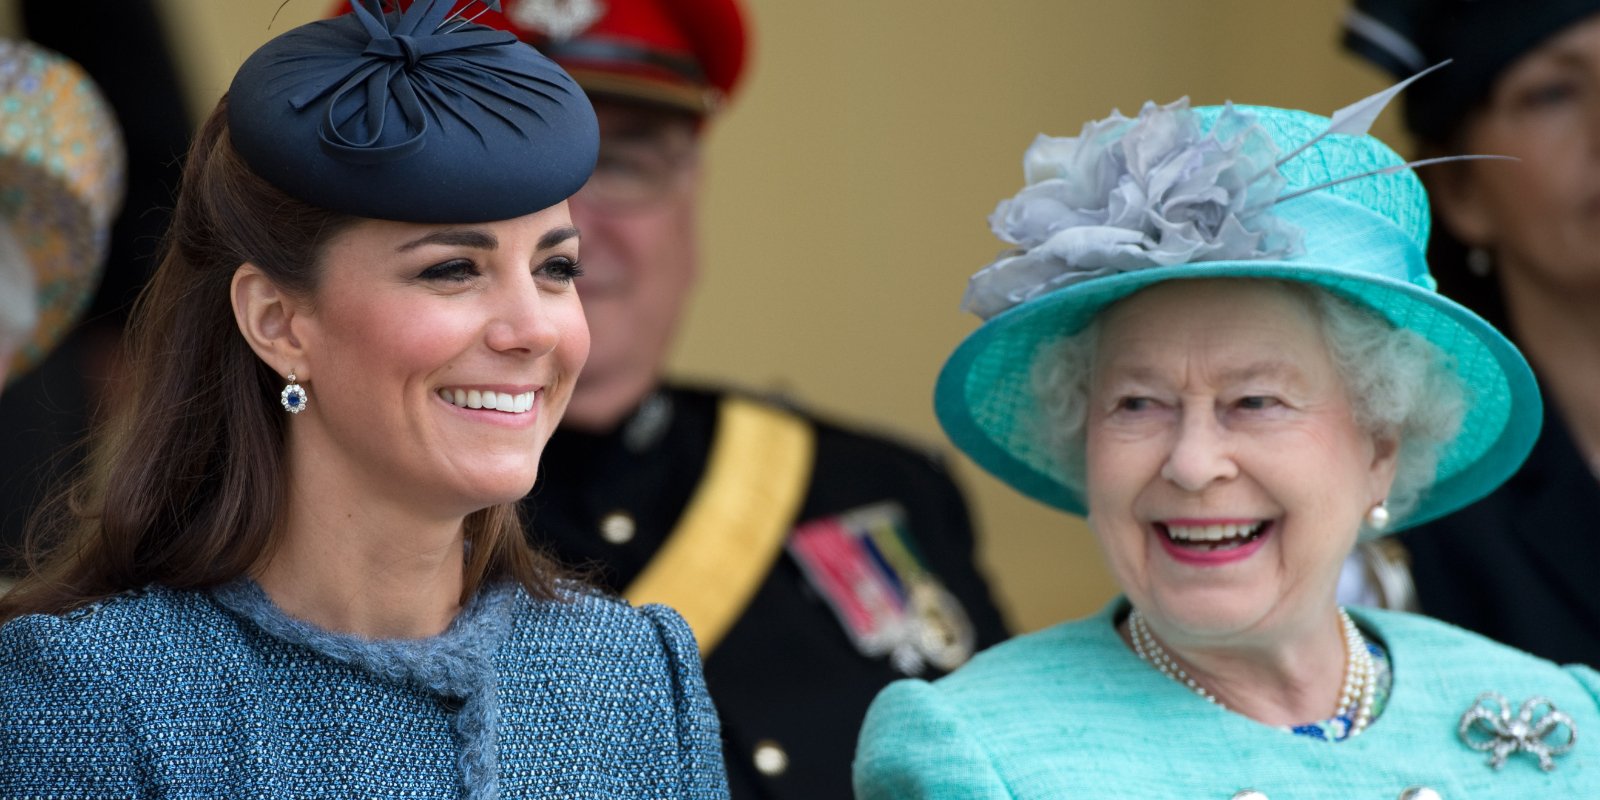 Kate Middleton and Queen Elizabeth attend Vernon Park during a Diamond Jubilee visit to Nottingham on June 13, 2012 in Nottingham, England.